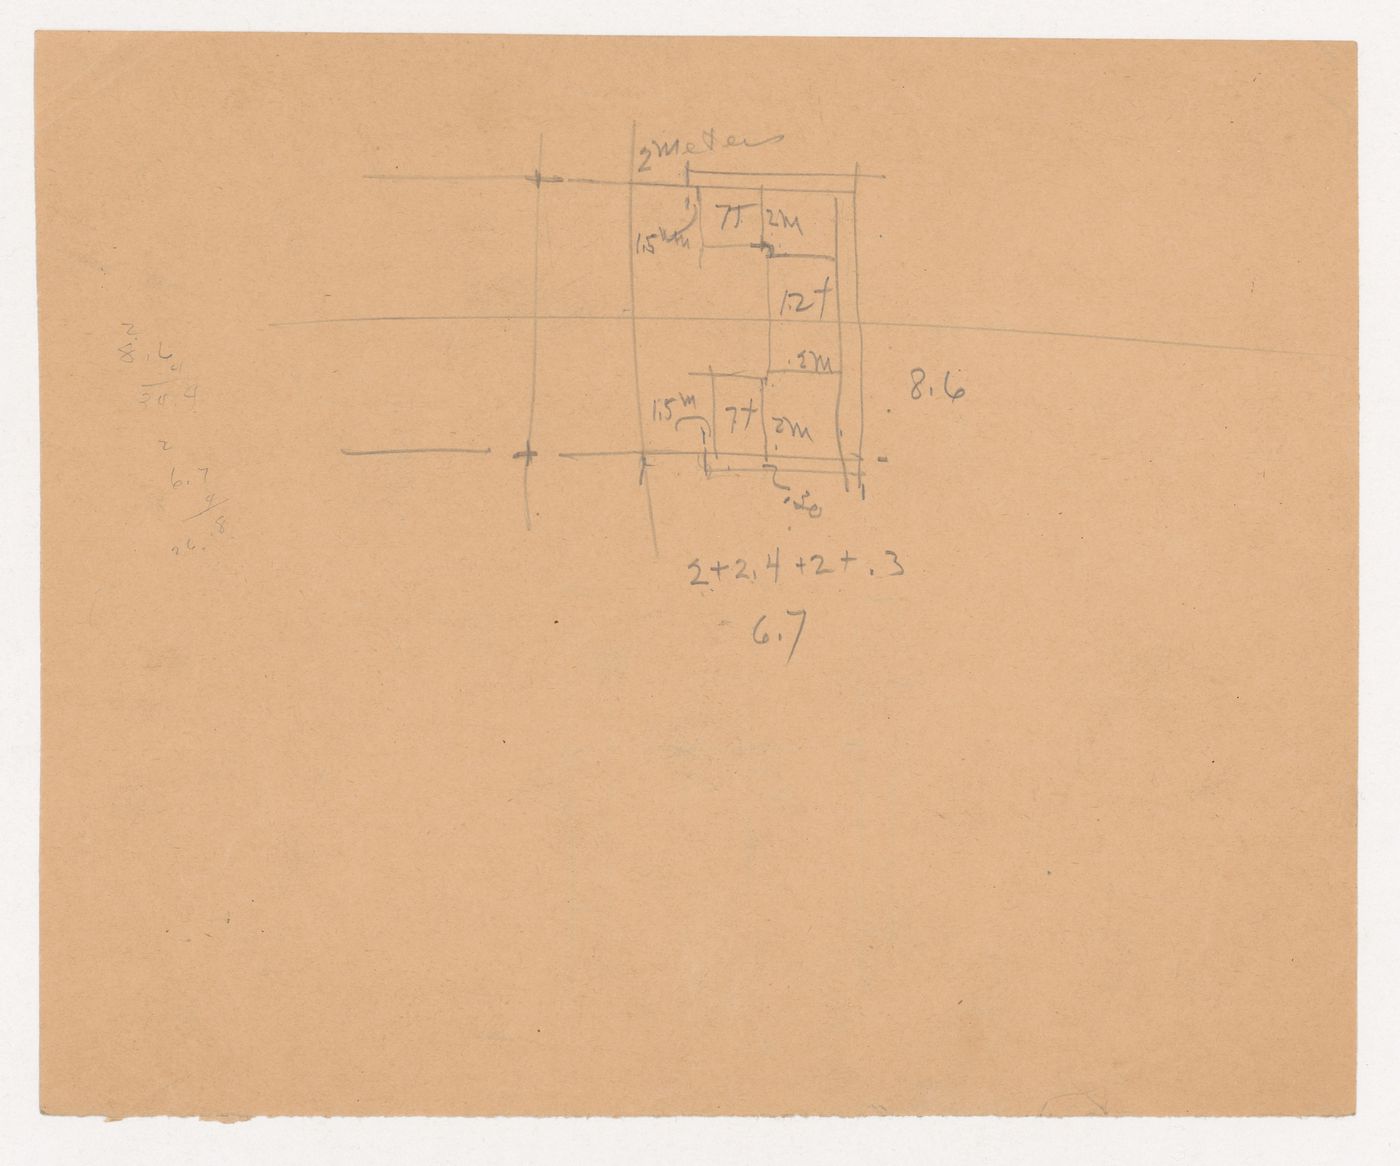 Sketch, possibly a plan for the Field House, Gymnasium and Natatorium complex; verso: Unidentified sketch, possibly a plan for the Field House, Gymnasium and Natatorium complex